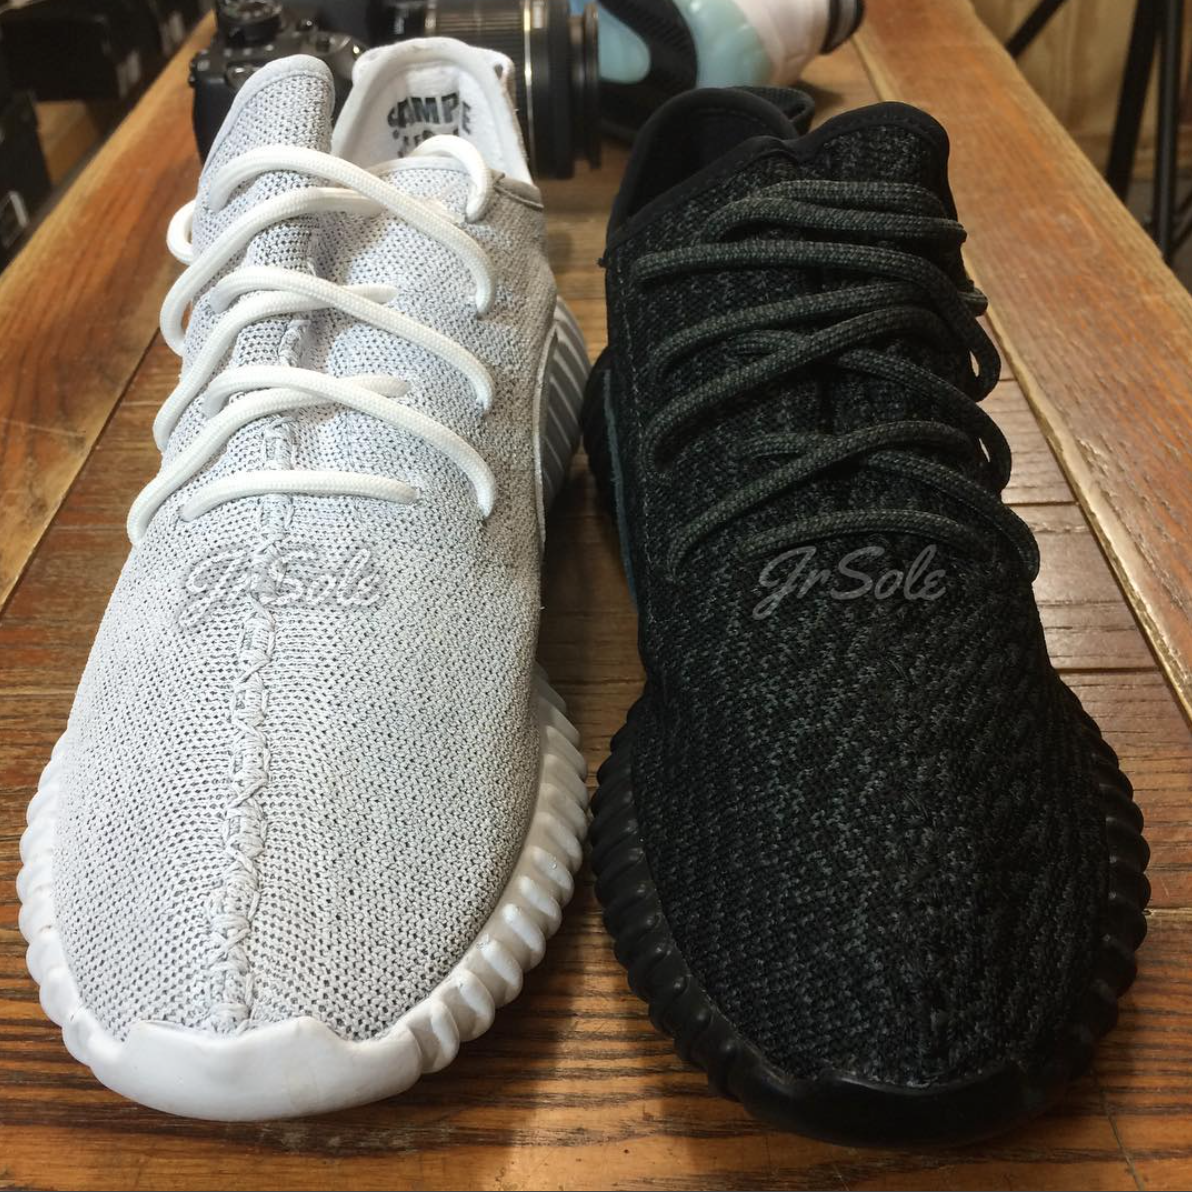 Yeezy laces,Yeezy Boost Official Adidas Yeezy Boost 350